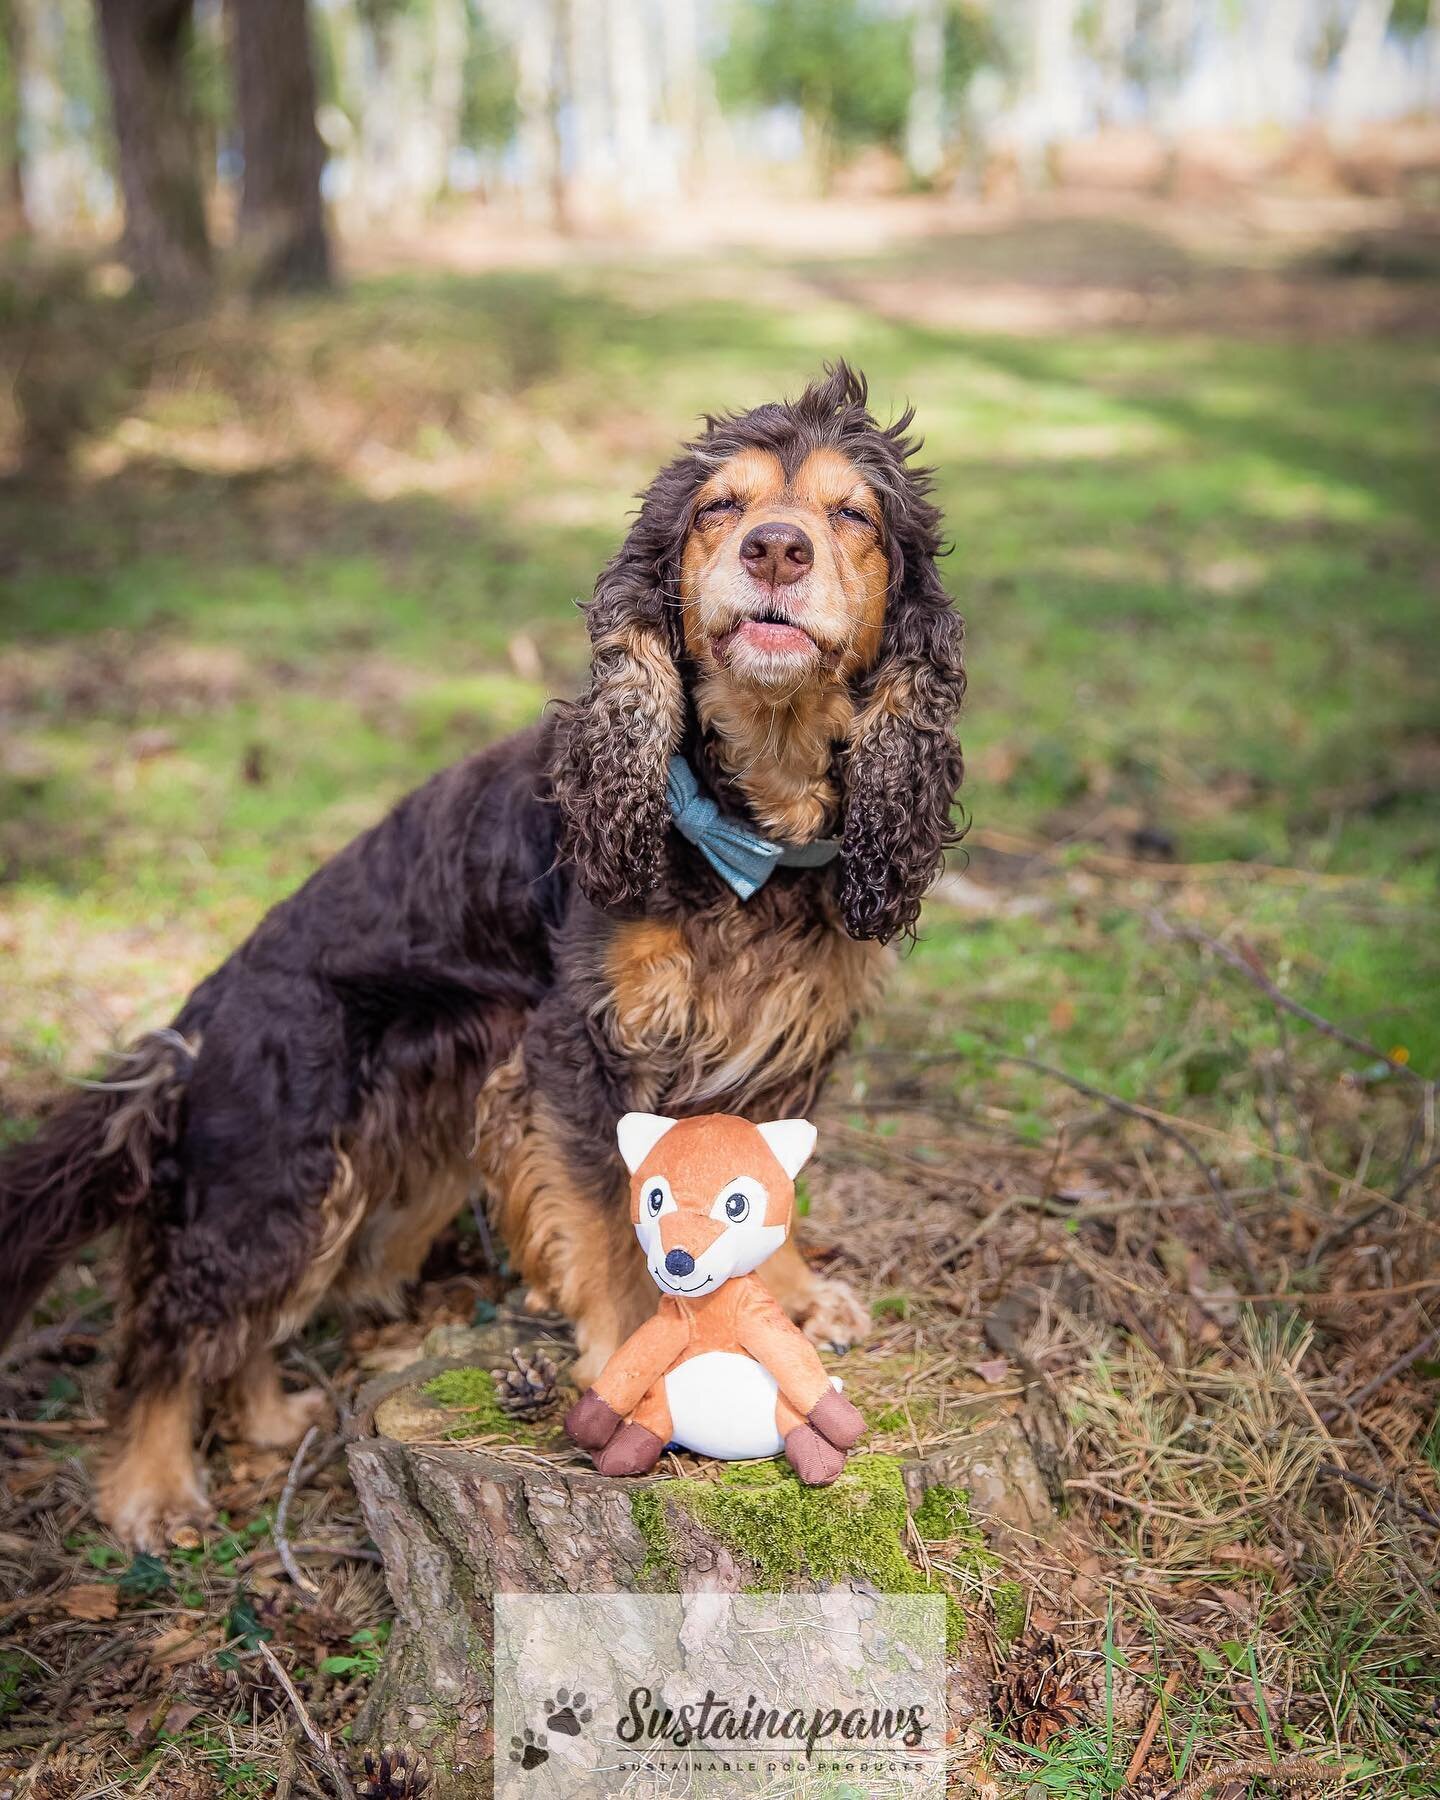 Beat the Monday blues 🦋

Our 100% recycled plastic plush toys give you something to smile about ☺️

They reduce the amount of plastics ending up in landfill and the oceans 🌊 and give your pups some fun as well! 🐾

Reduce. Reuse. Recycle ♻️ 

#ecof